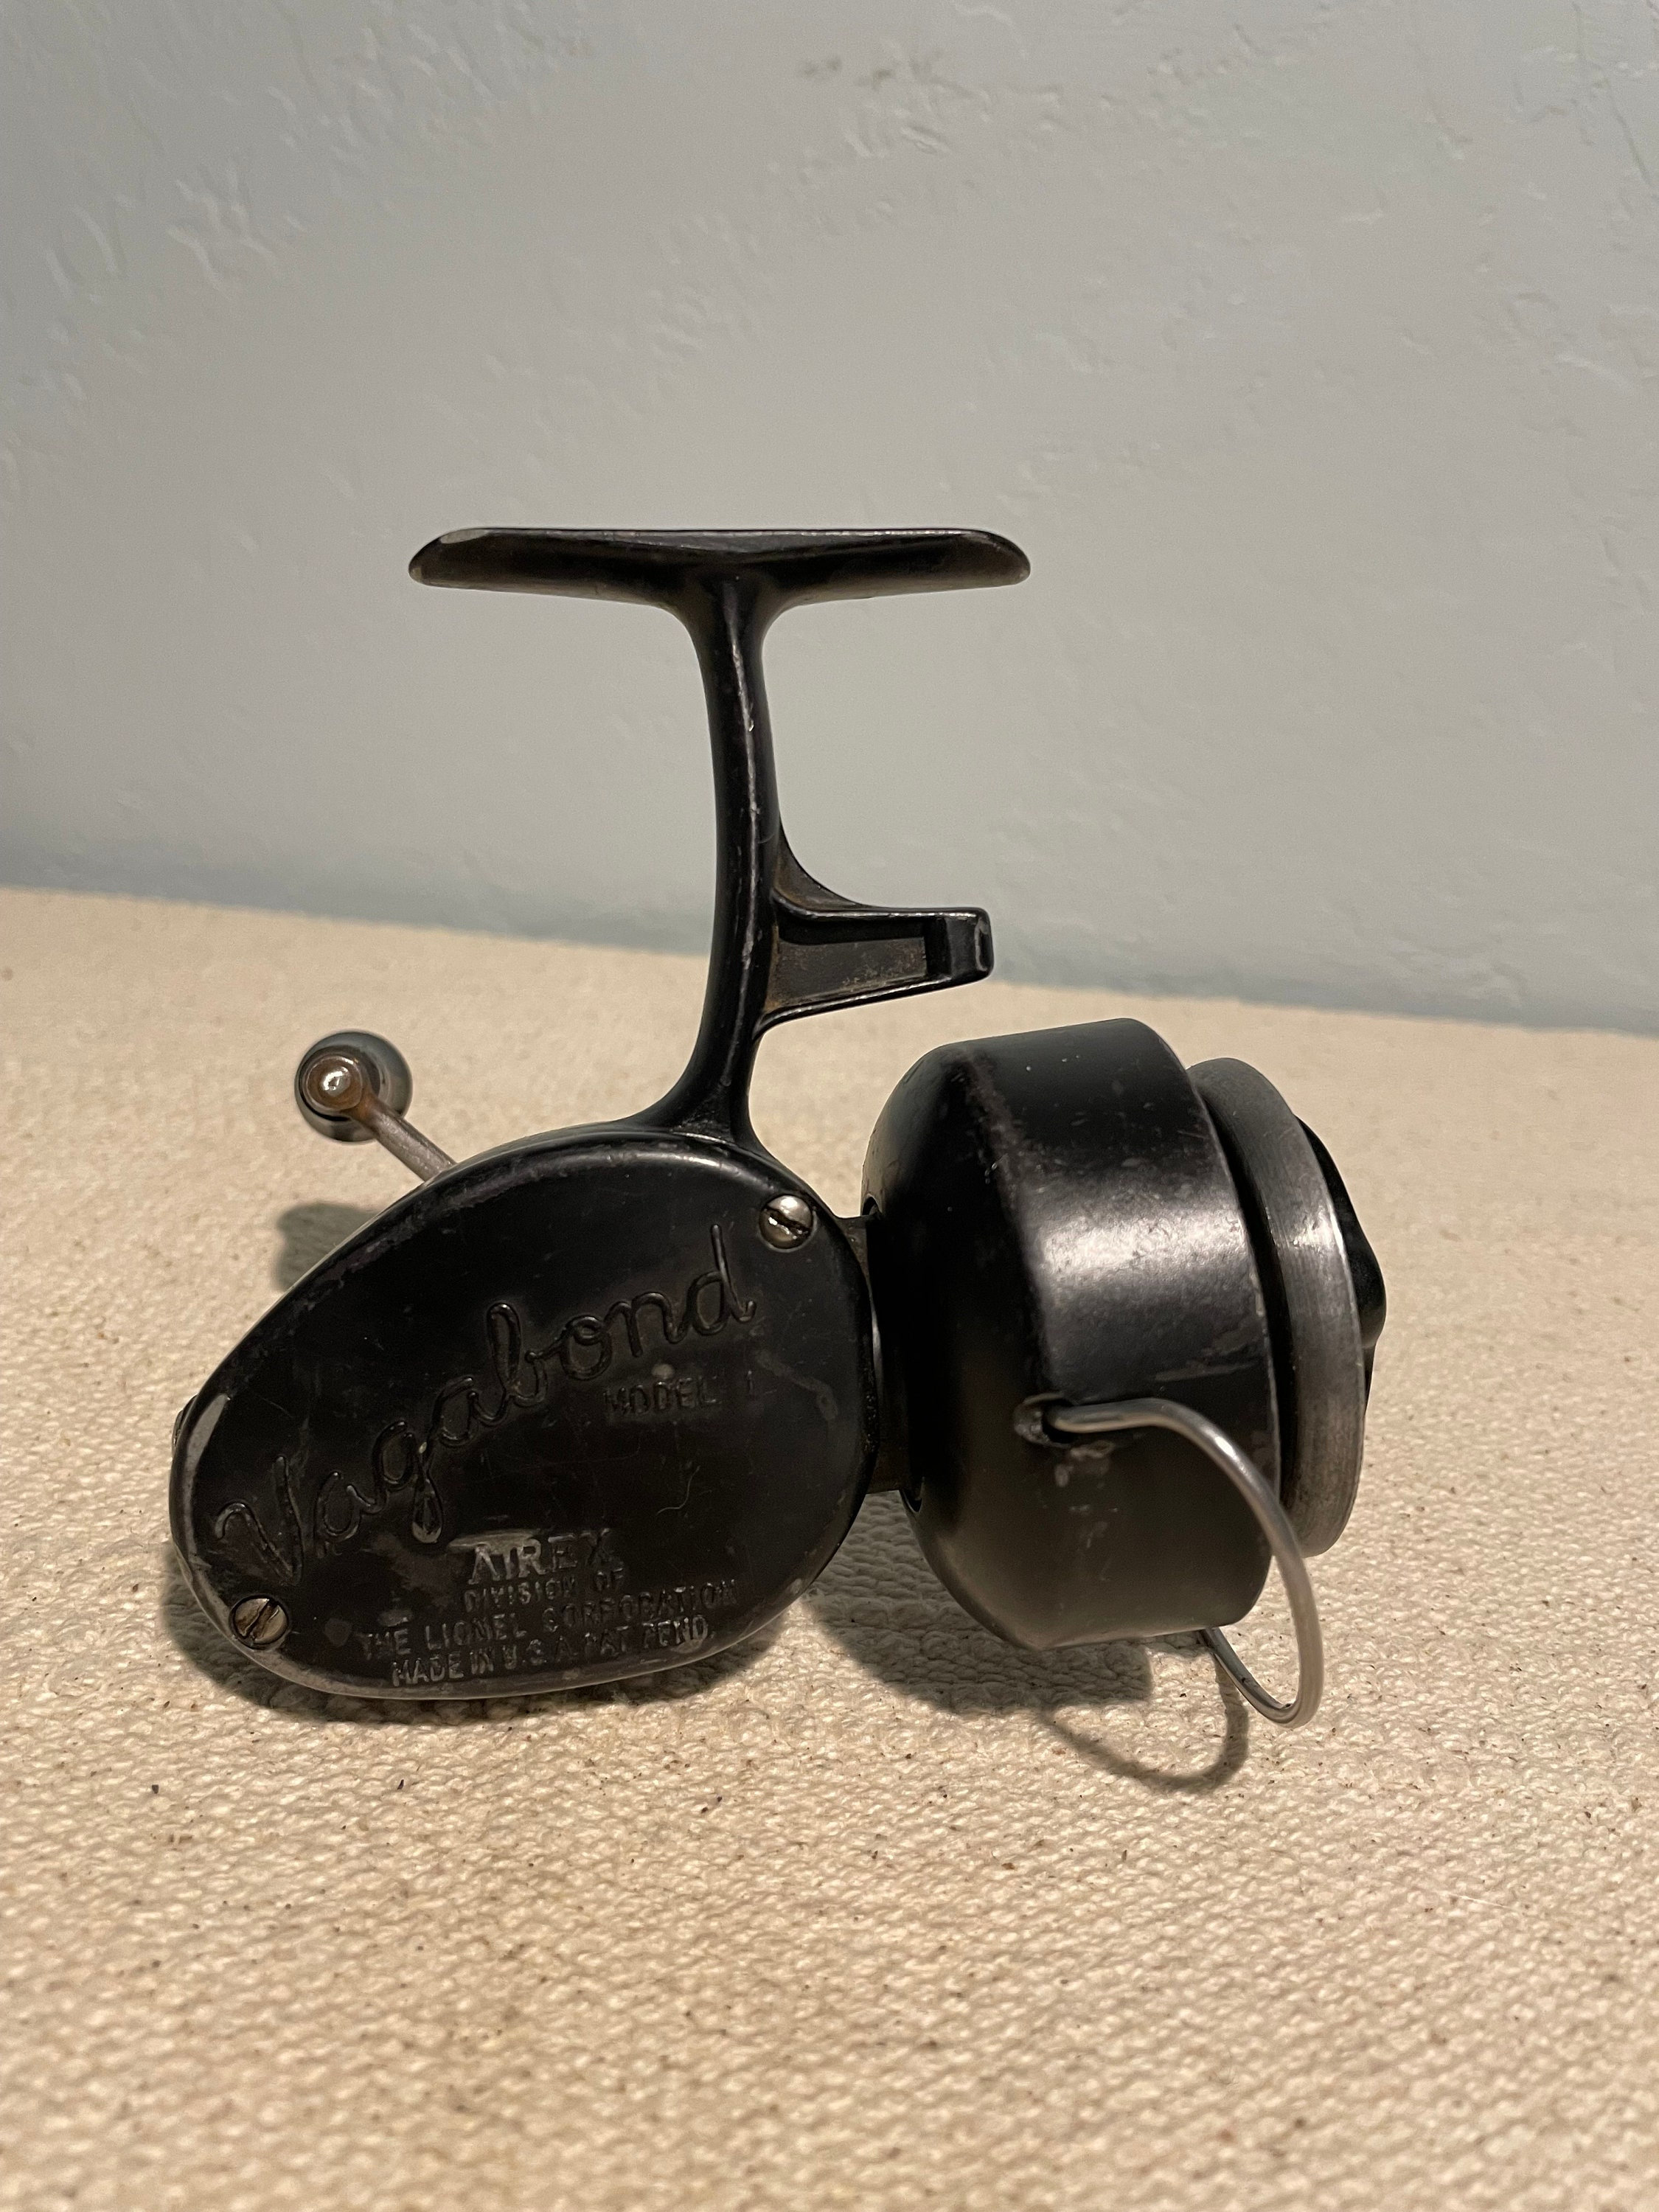 Vintage Vagabond Airex Model 1 Fishing Reel Made by Lionel Train